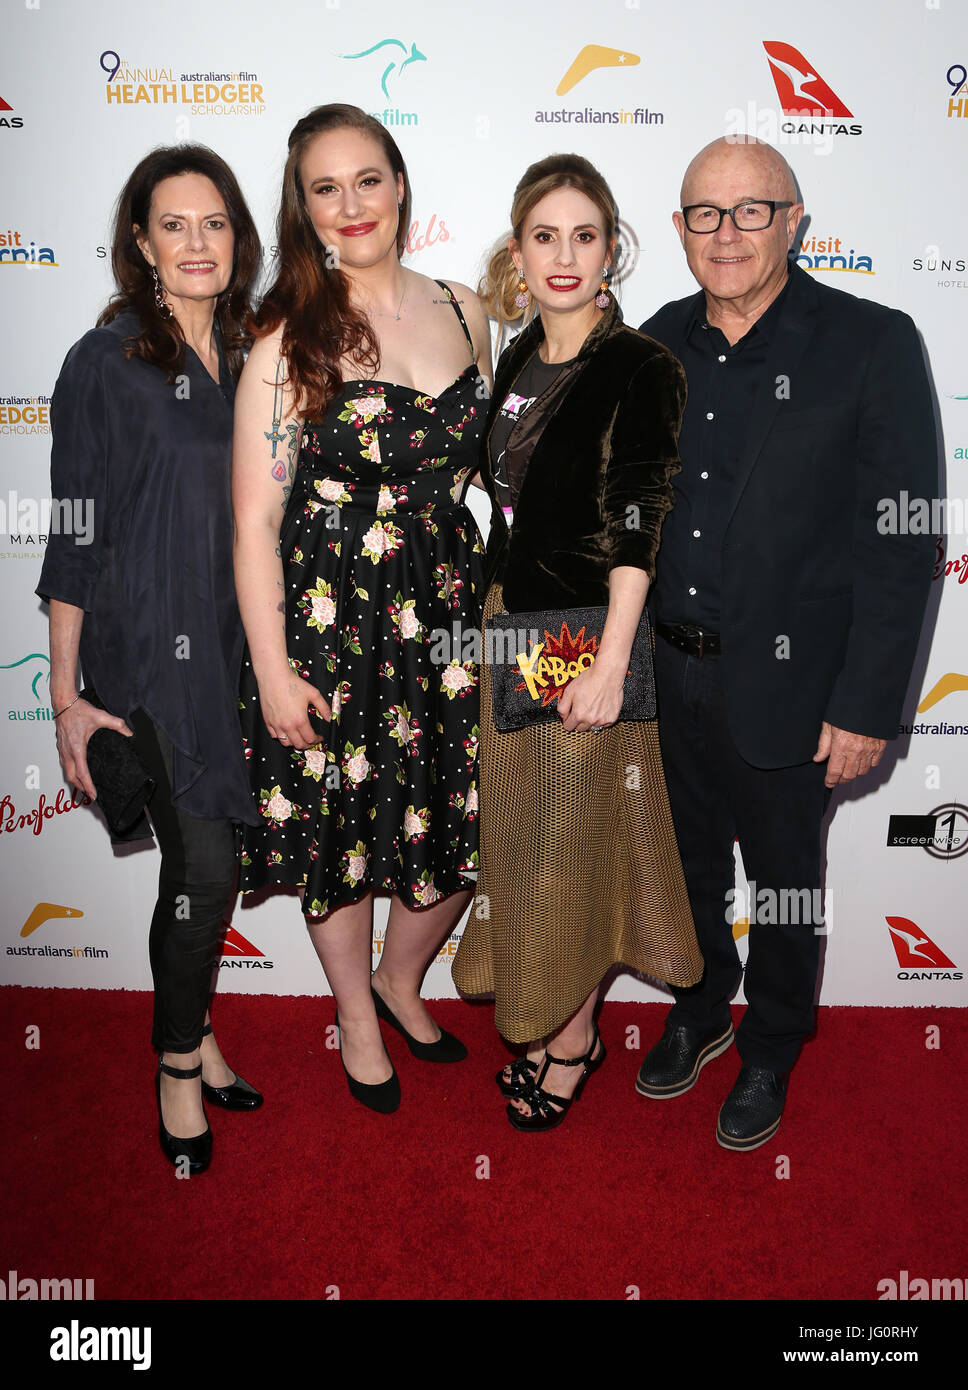 The 9th Annual Australians In Film Heath Ledger Scholarship Dinner  Featuring: Sally Bell, Ashleigh Bell, Kate Ledger, Kim Ledger Where: West Hollywood, California, United States When: 01 Jun 2017 Credit: FayesVision/WENN.com Stock Photo